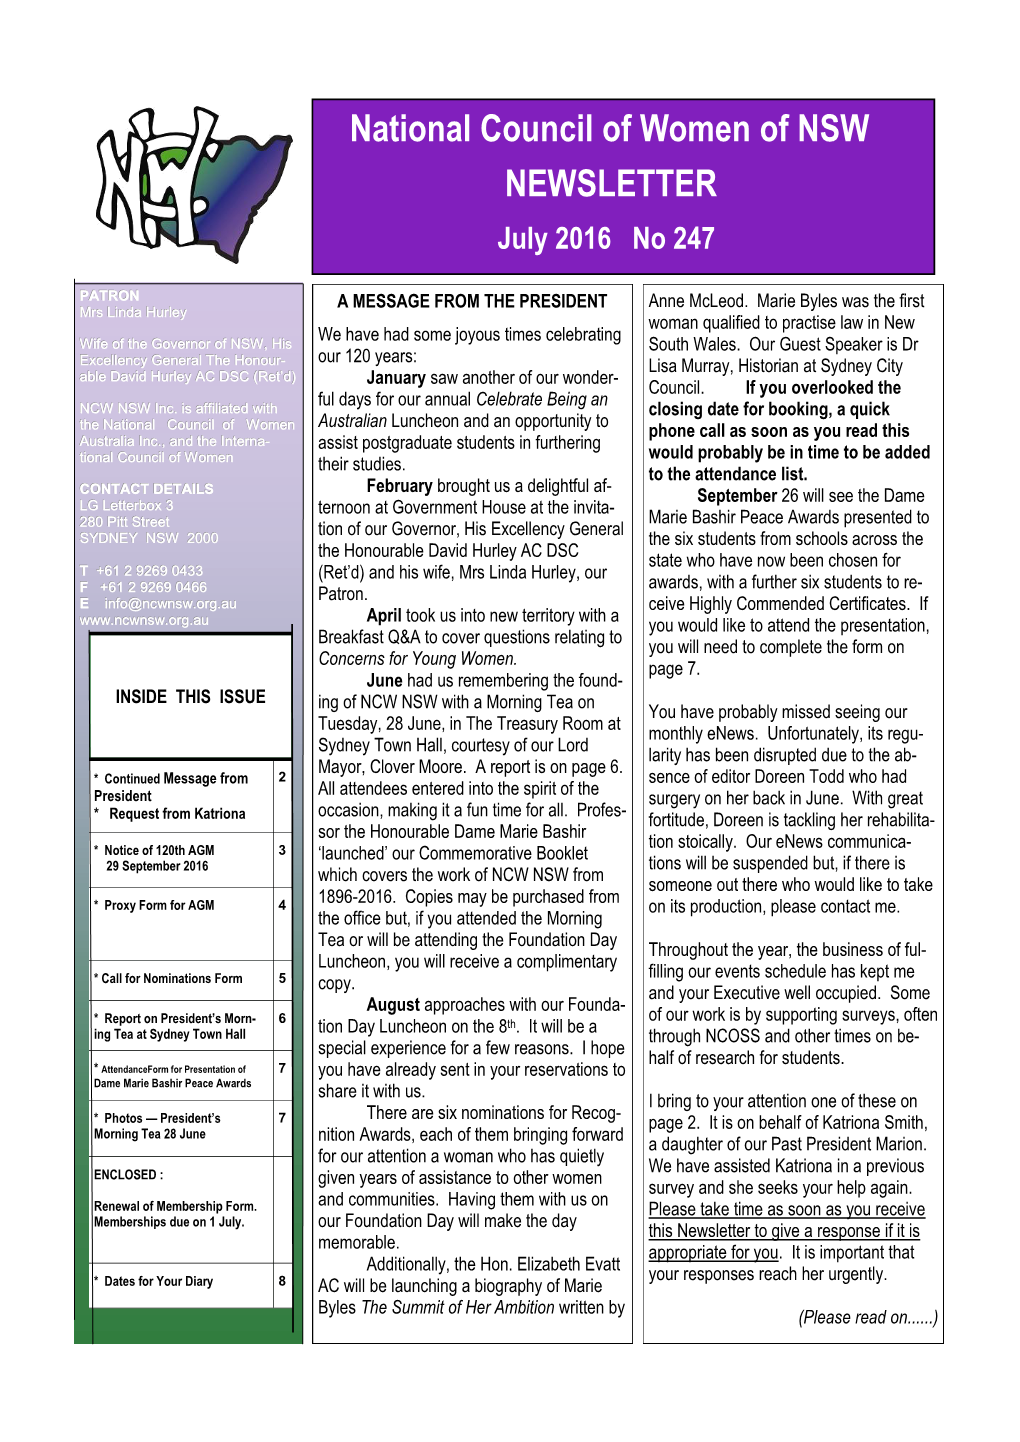 National Council of Women of NSW NEWSLETTER